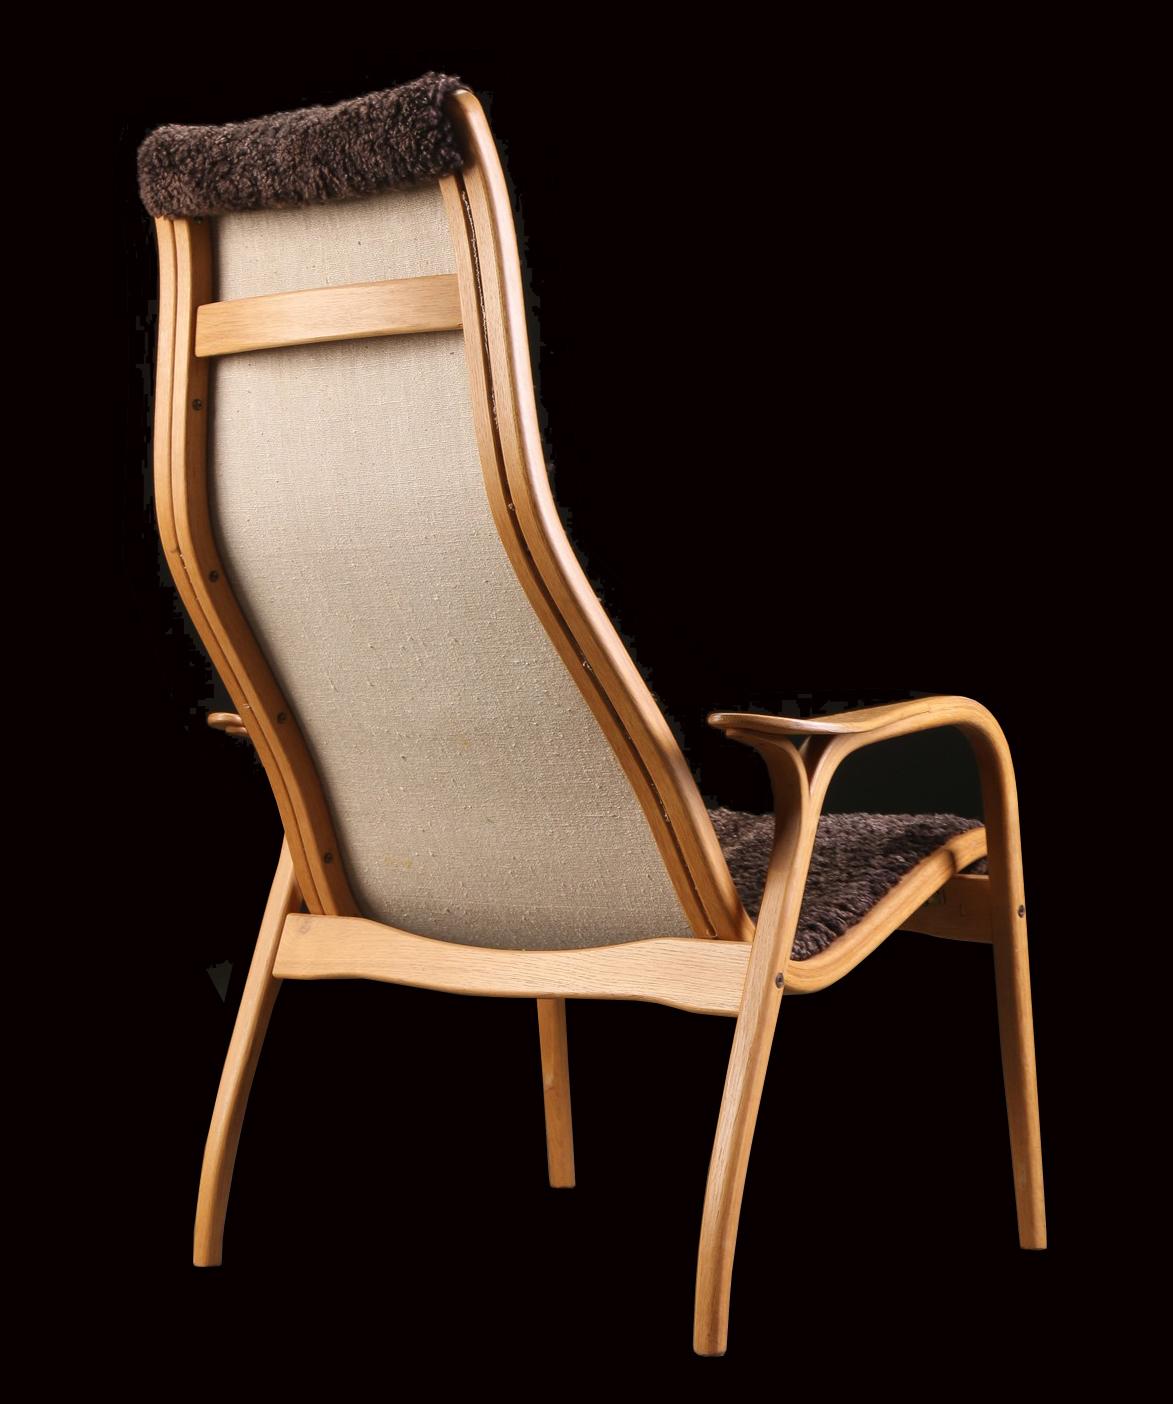 A very nice example of this super comfortable yet light armchair, designed by Yngve Ekstrom, made of laminated oak and sheepskin and in very nice original condition.